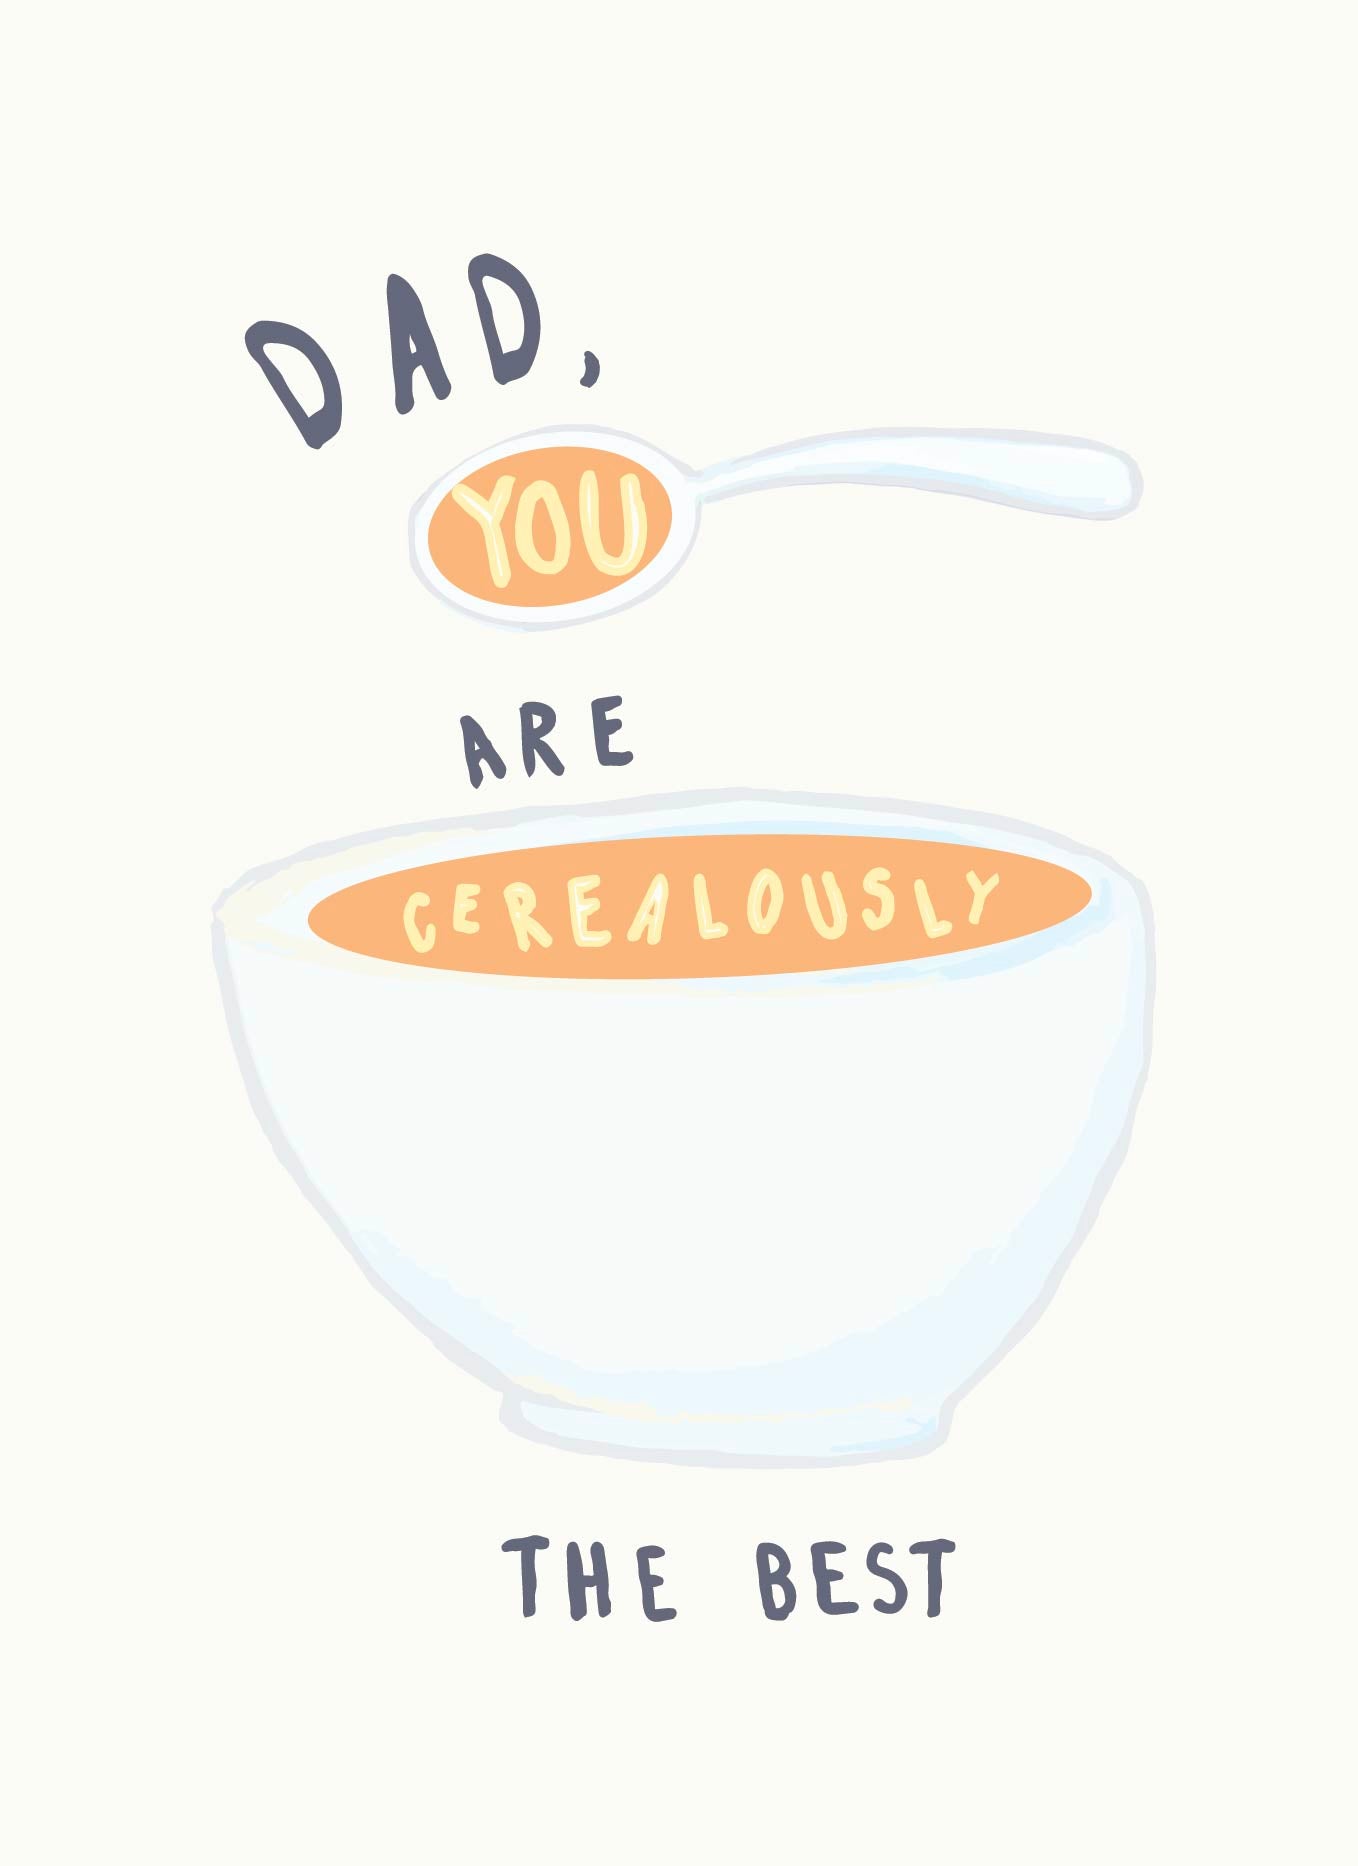 'Dad, you're cereal-ously the best'